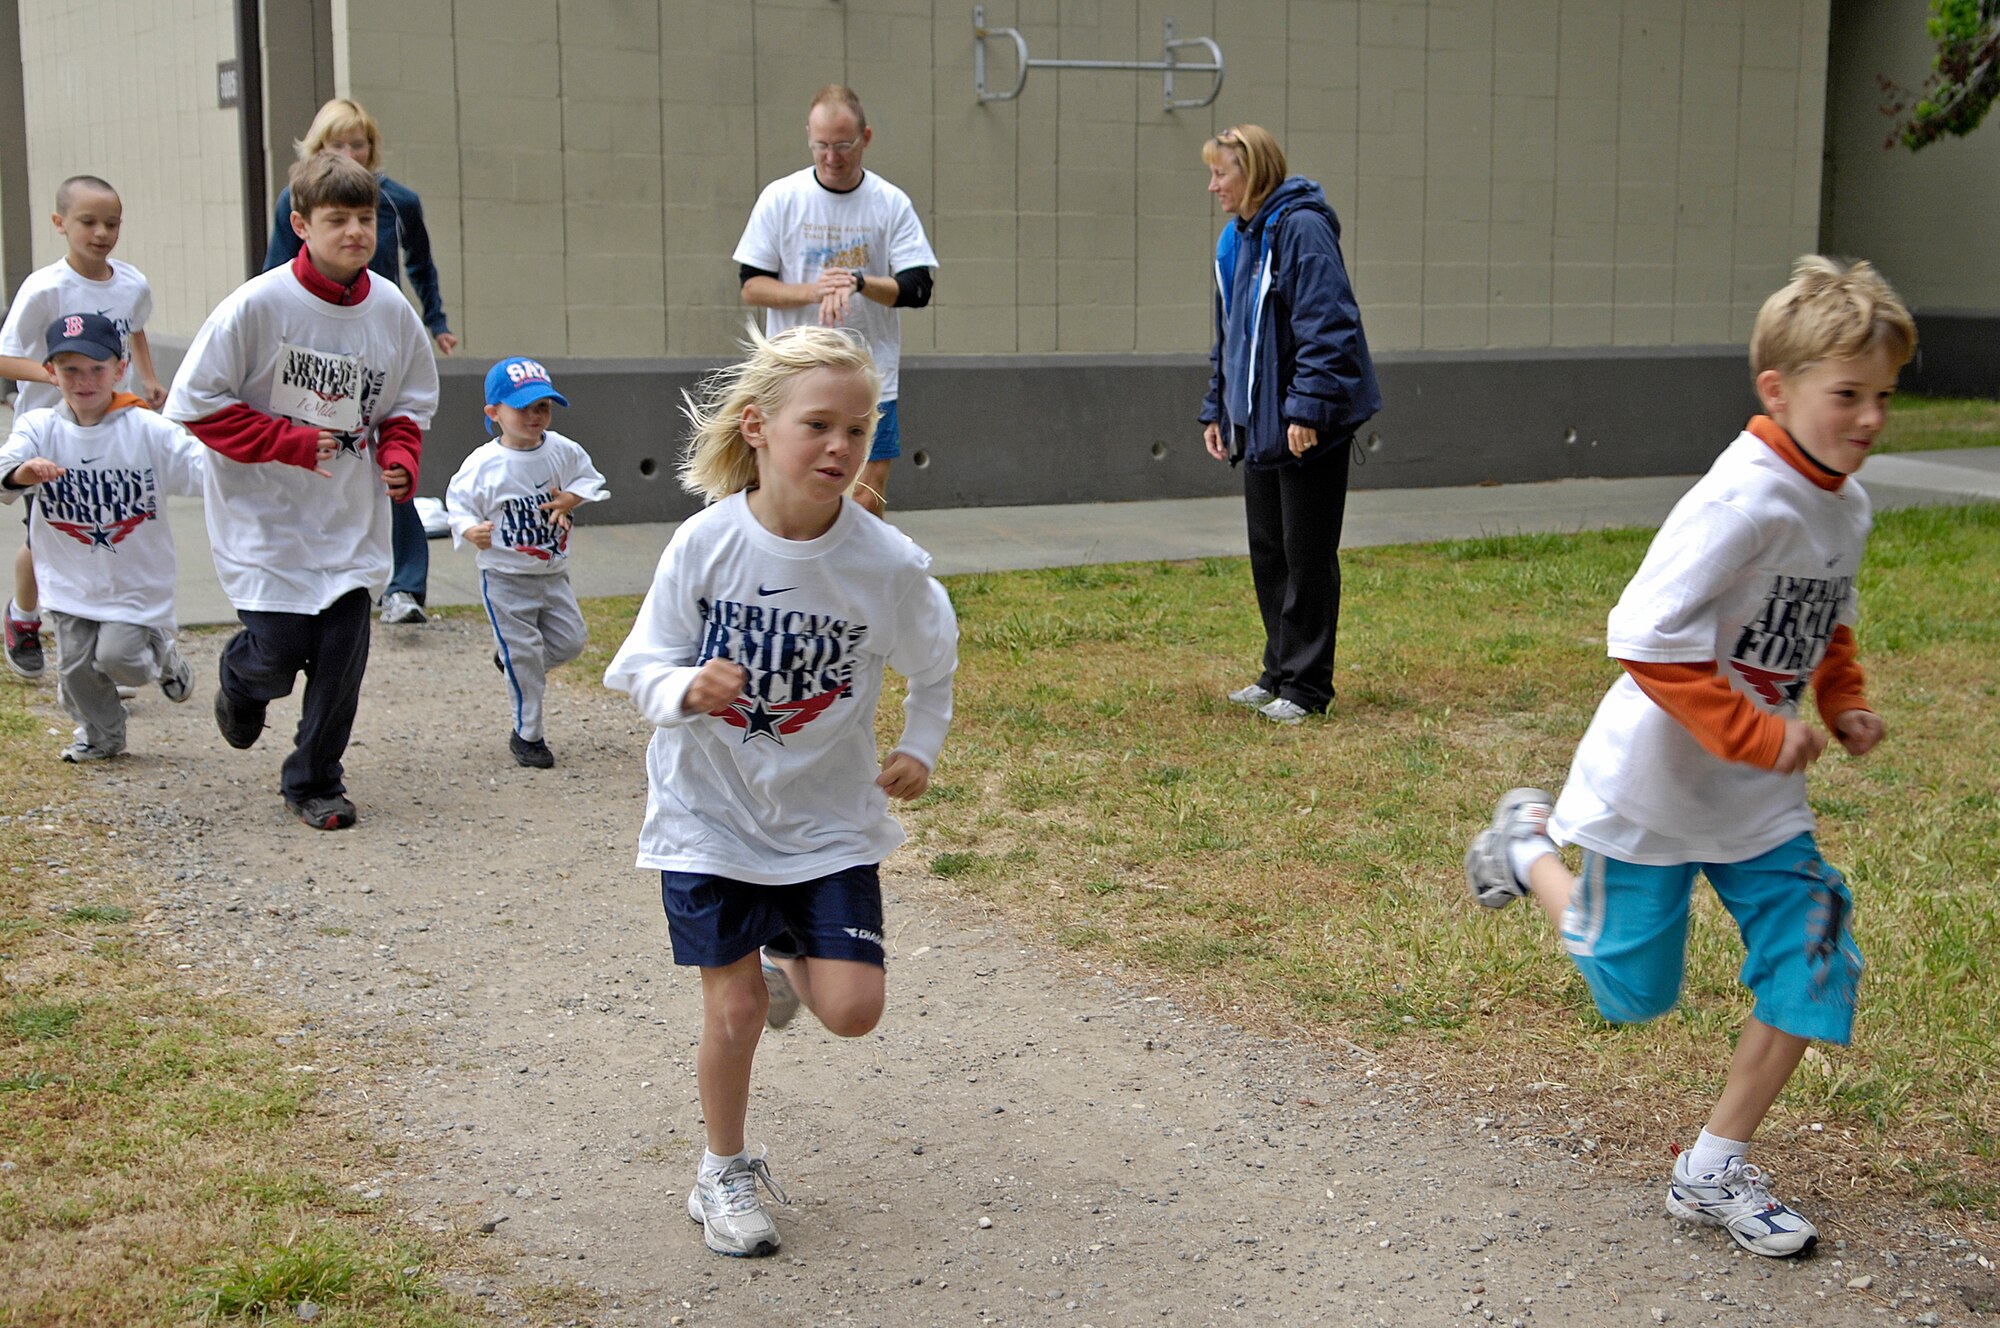 VANDENBERG AIR FORCE BASE, Calif. -- Children of Team V members compete during the Armed Forces Kids Run at the base trail here Saturday, May 15, 2010. Patrick Ovesen, son of Senior Master Sgt. David Ovesen, from the 30th Space Communications Squadron, won first place in the race. (U.S. Air Force photo/Airman 1st Class Andrew Lee))